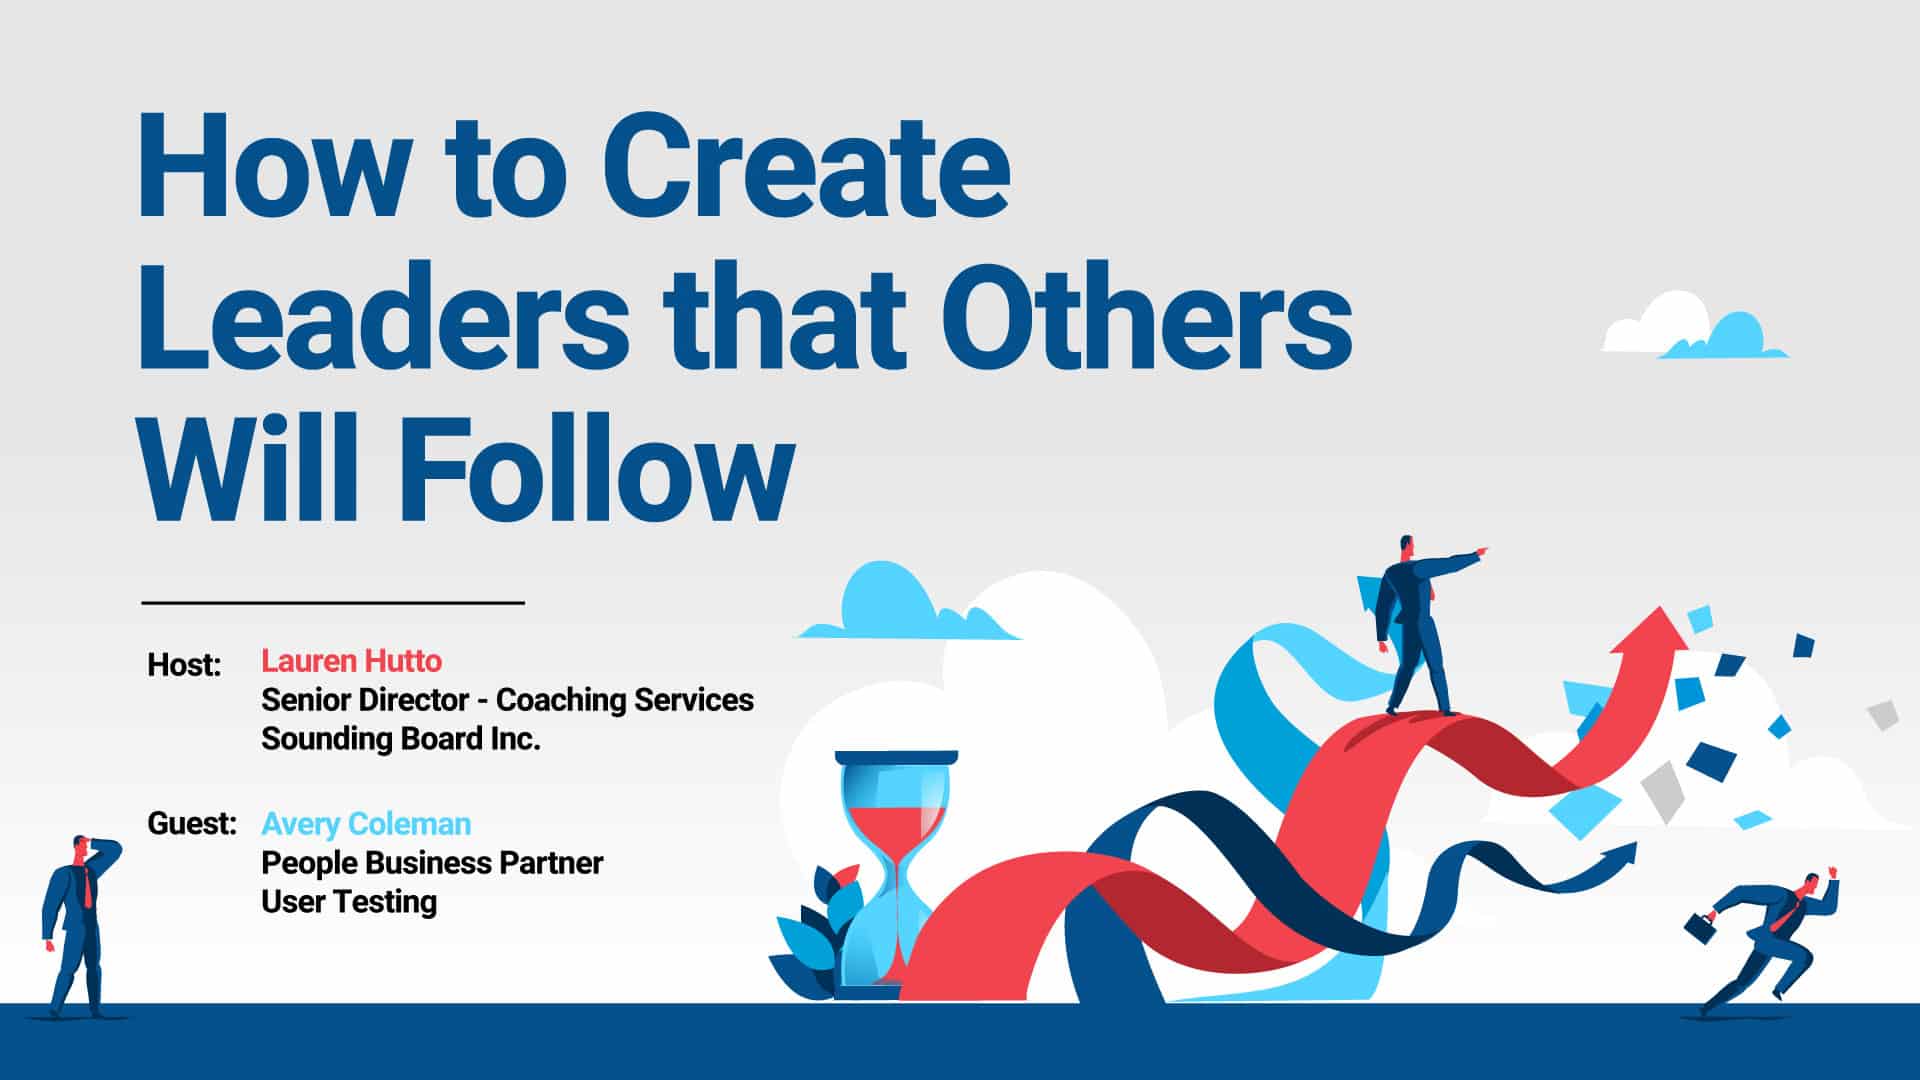 How to Create Leaders that Others Will Follow